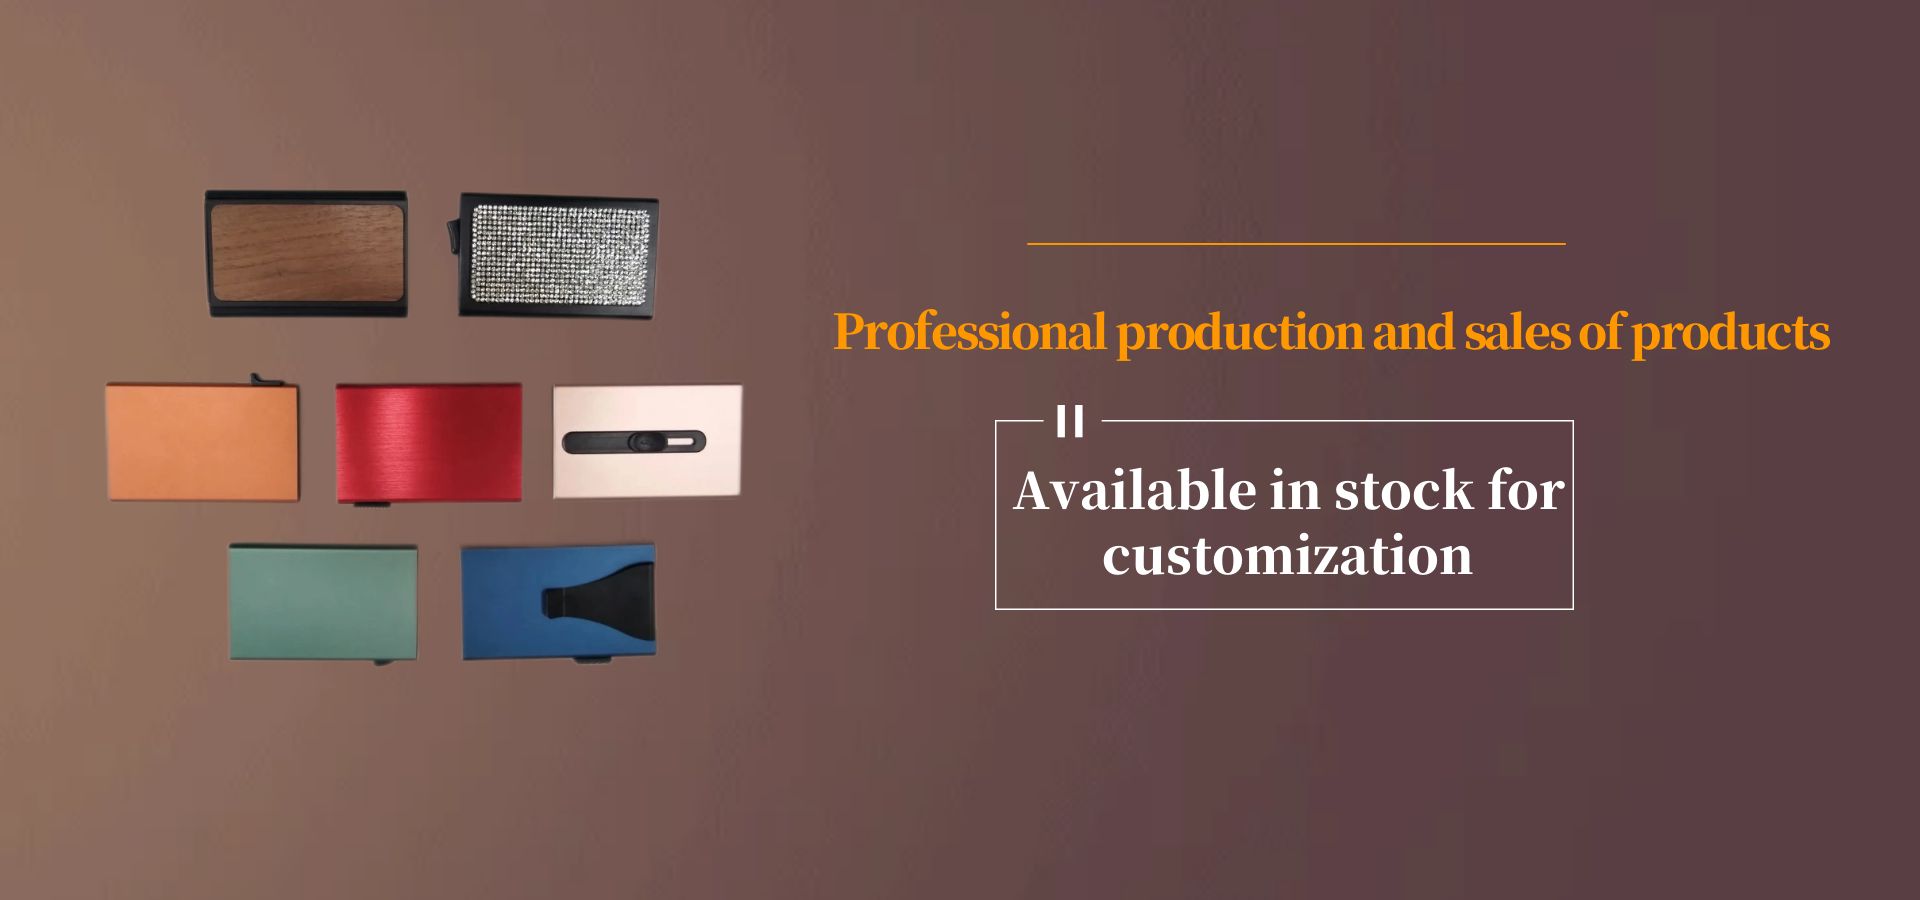 Professional production and sales ofproducts